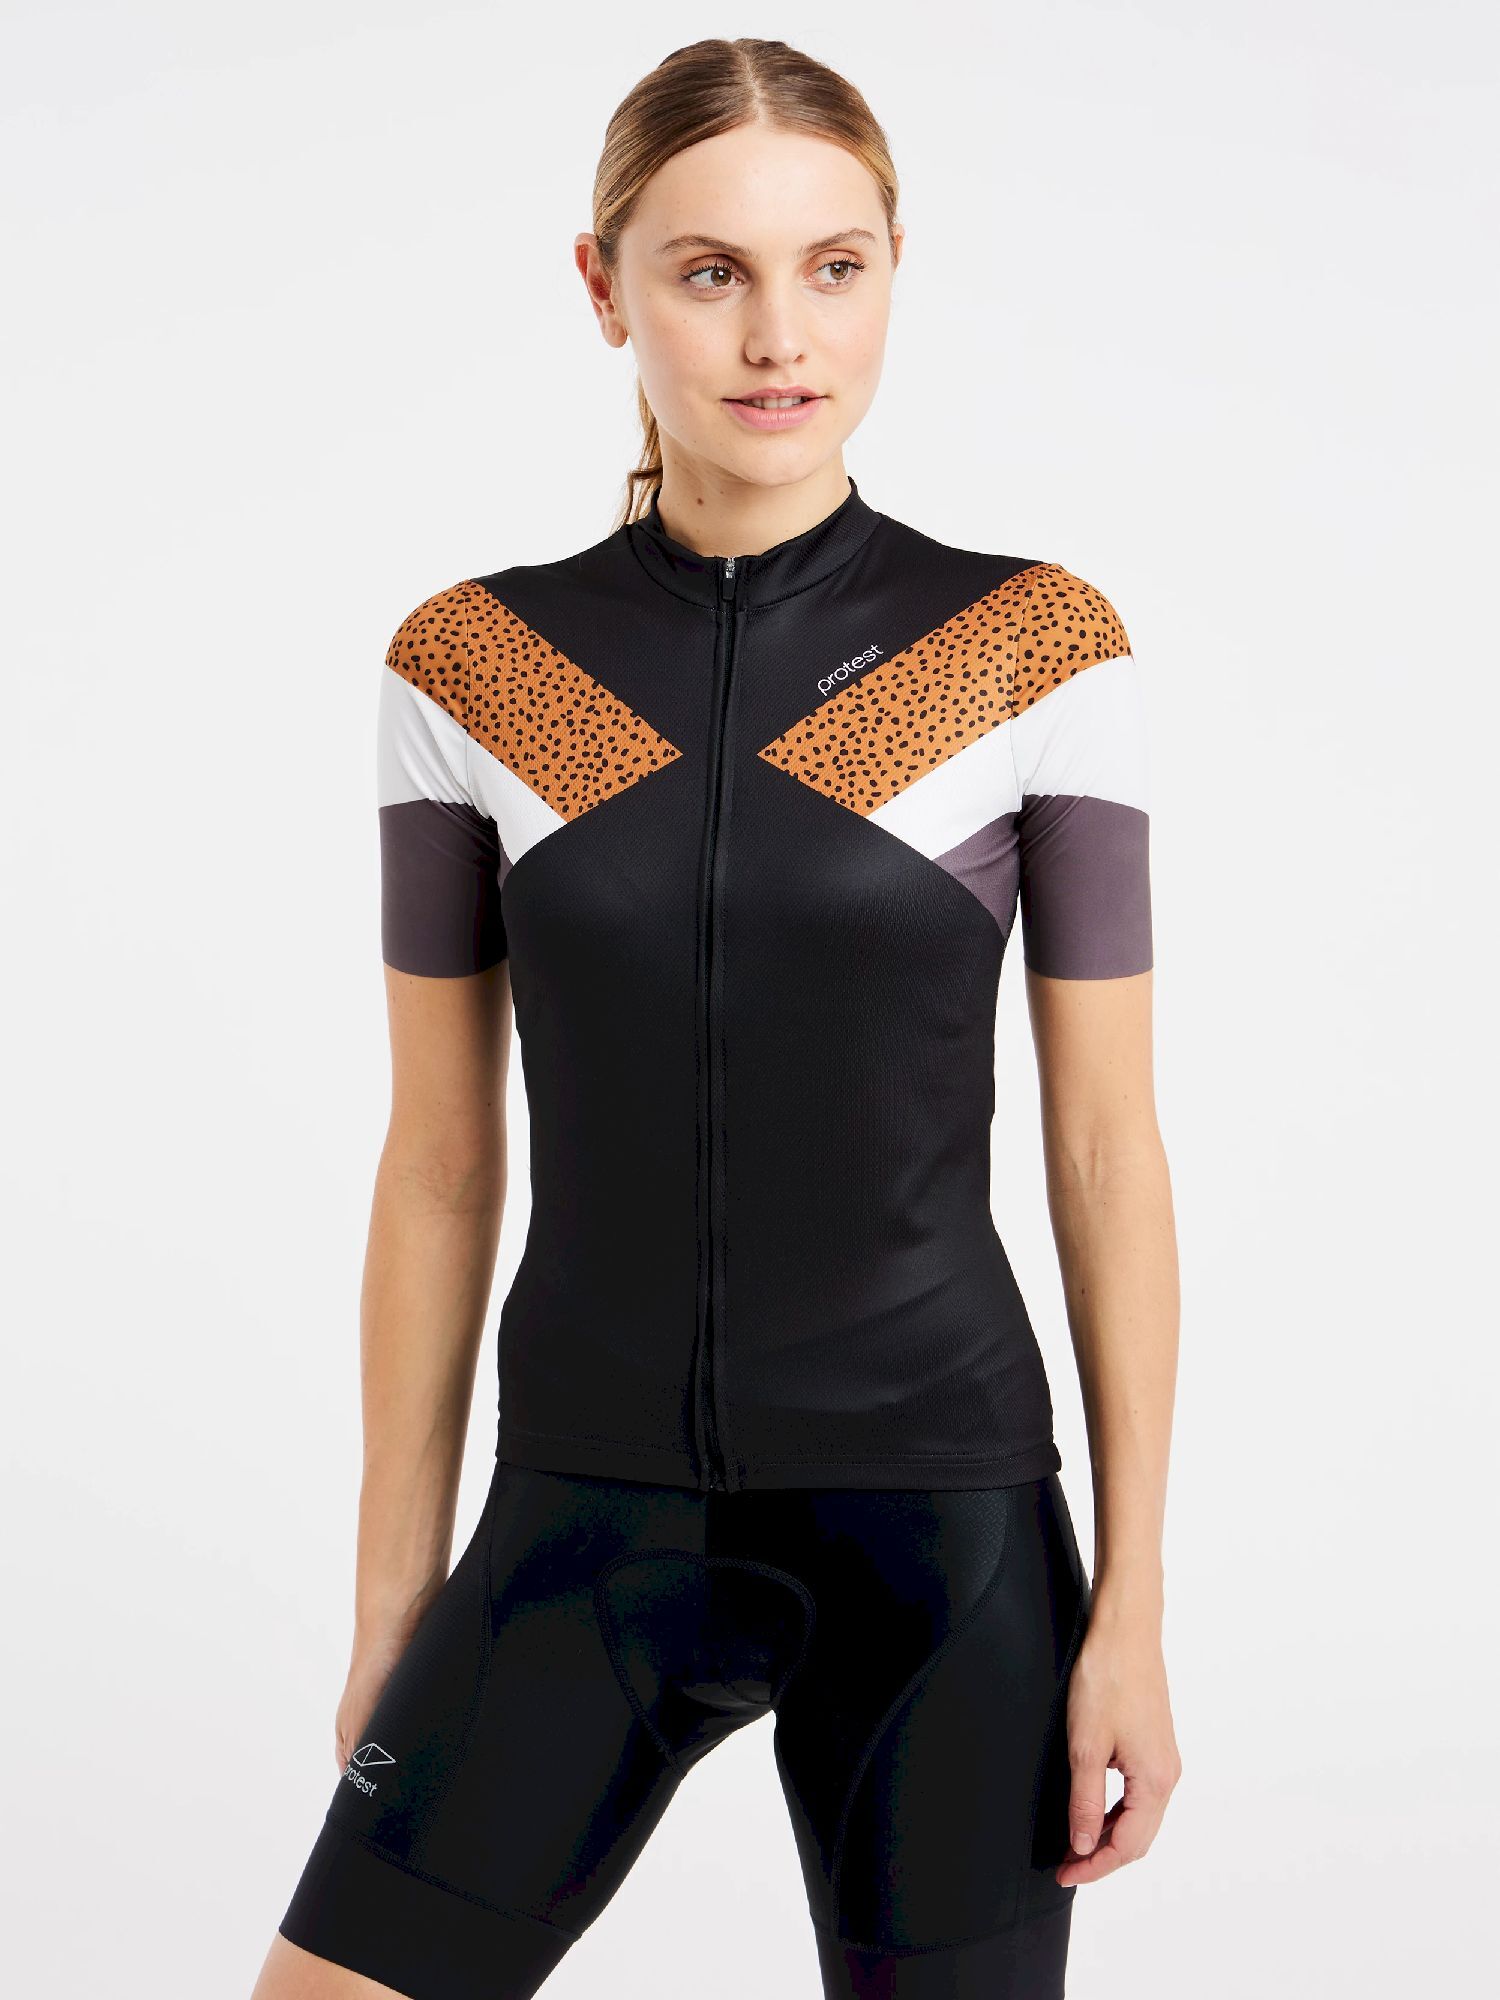 Protest Prtotago - Cycling jersey - Women's | Hardloop